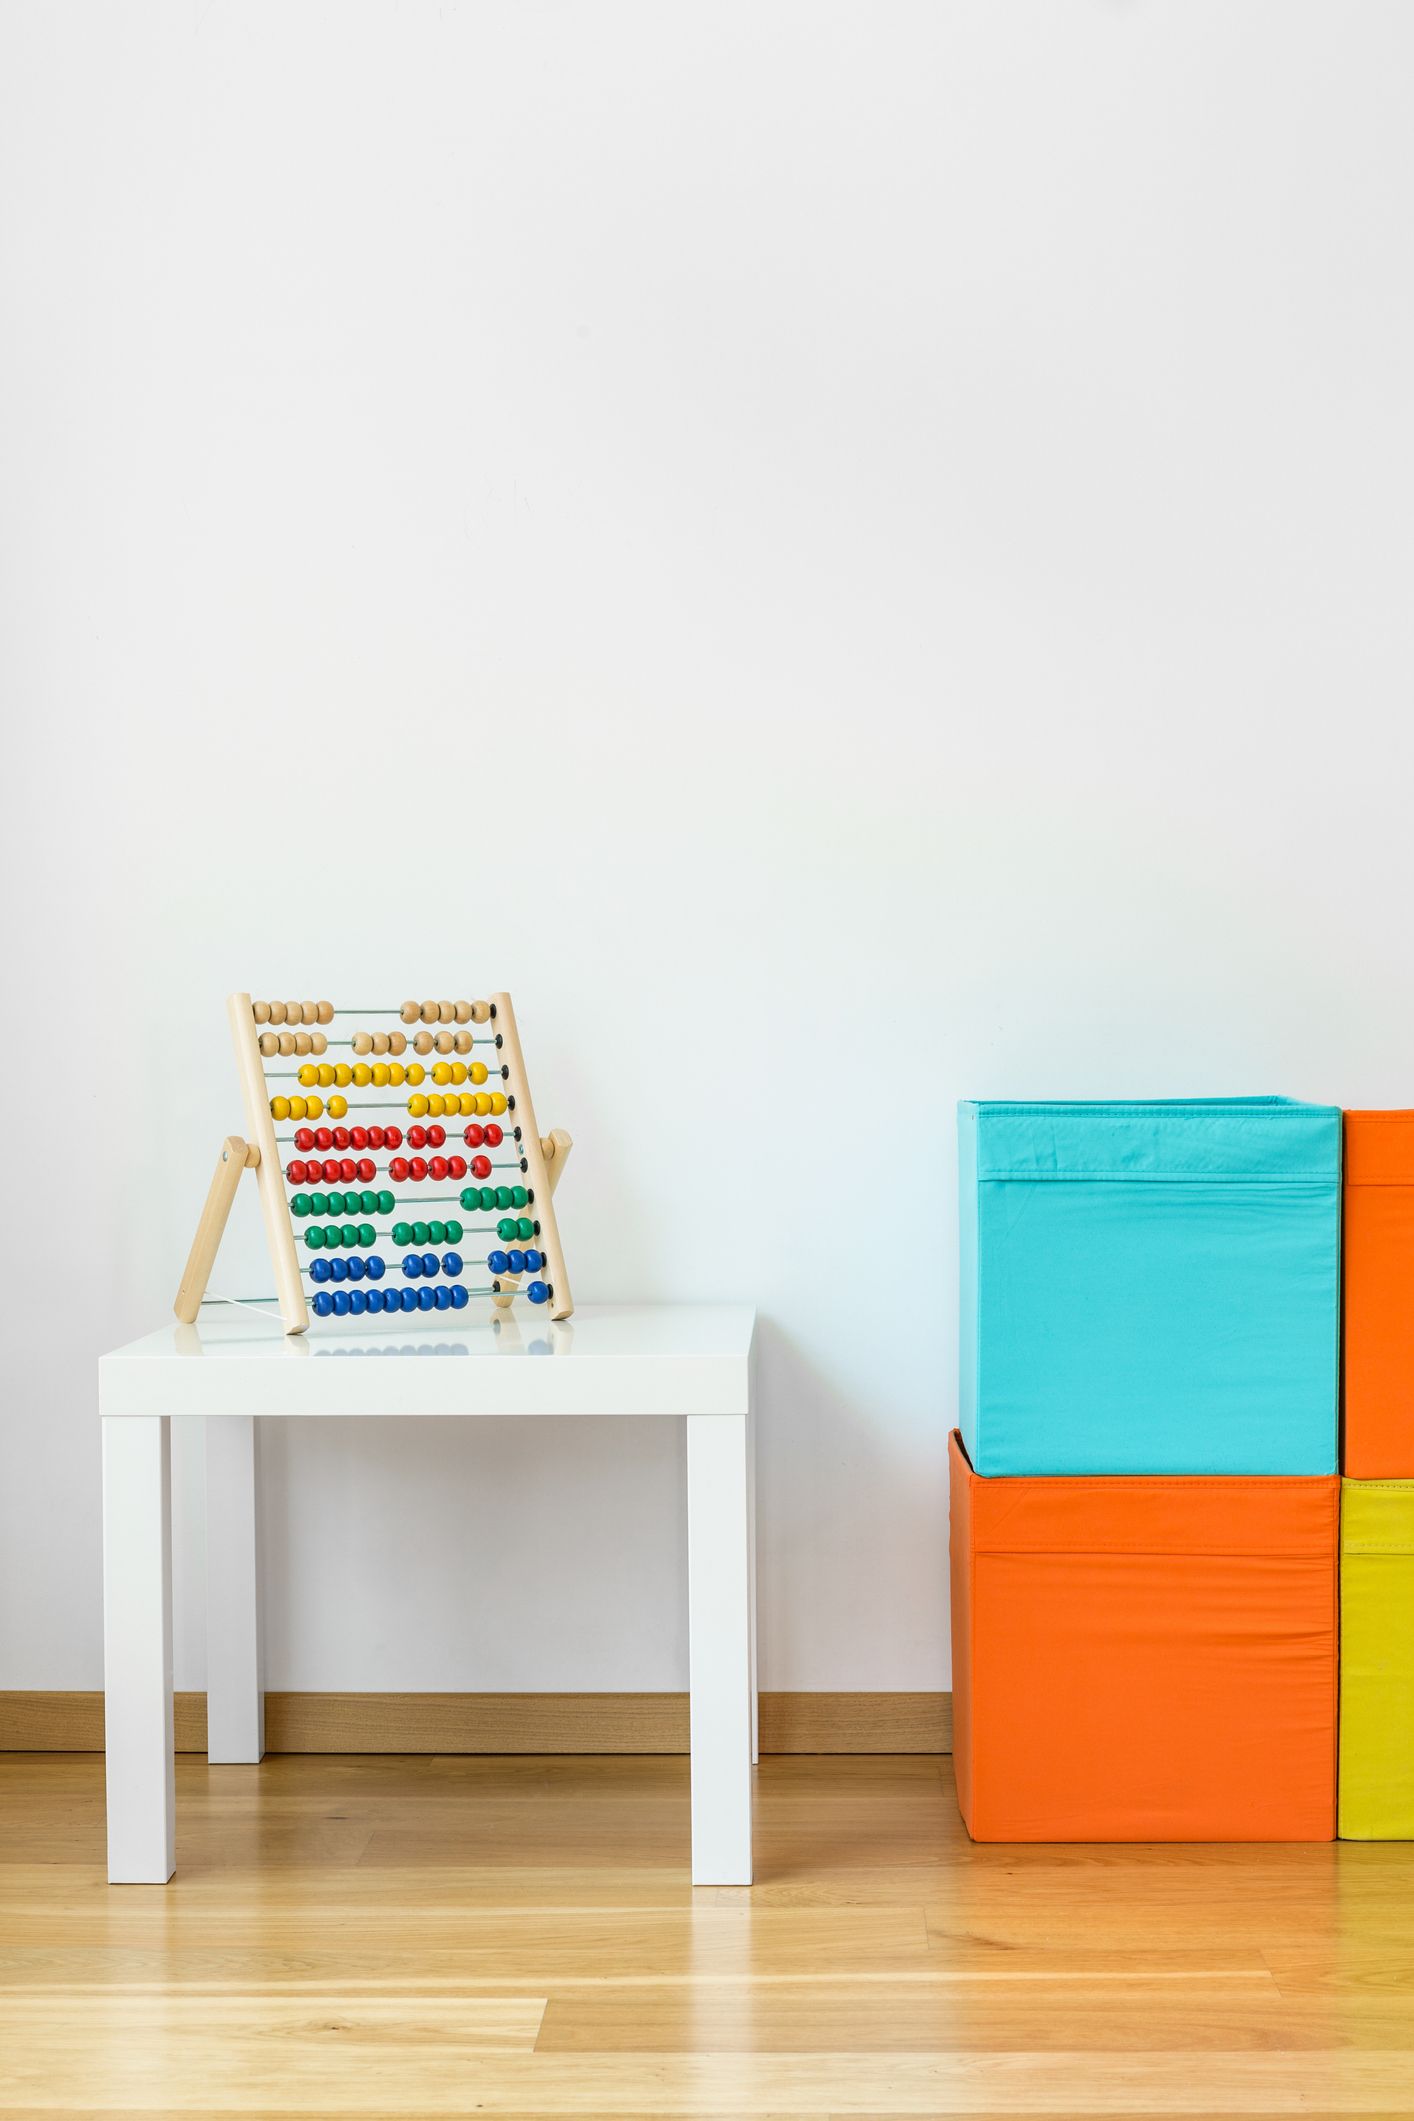 5 Simple Ideas for Storing Toys! - Design Improvised